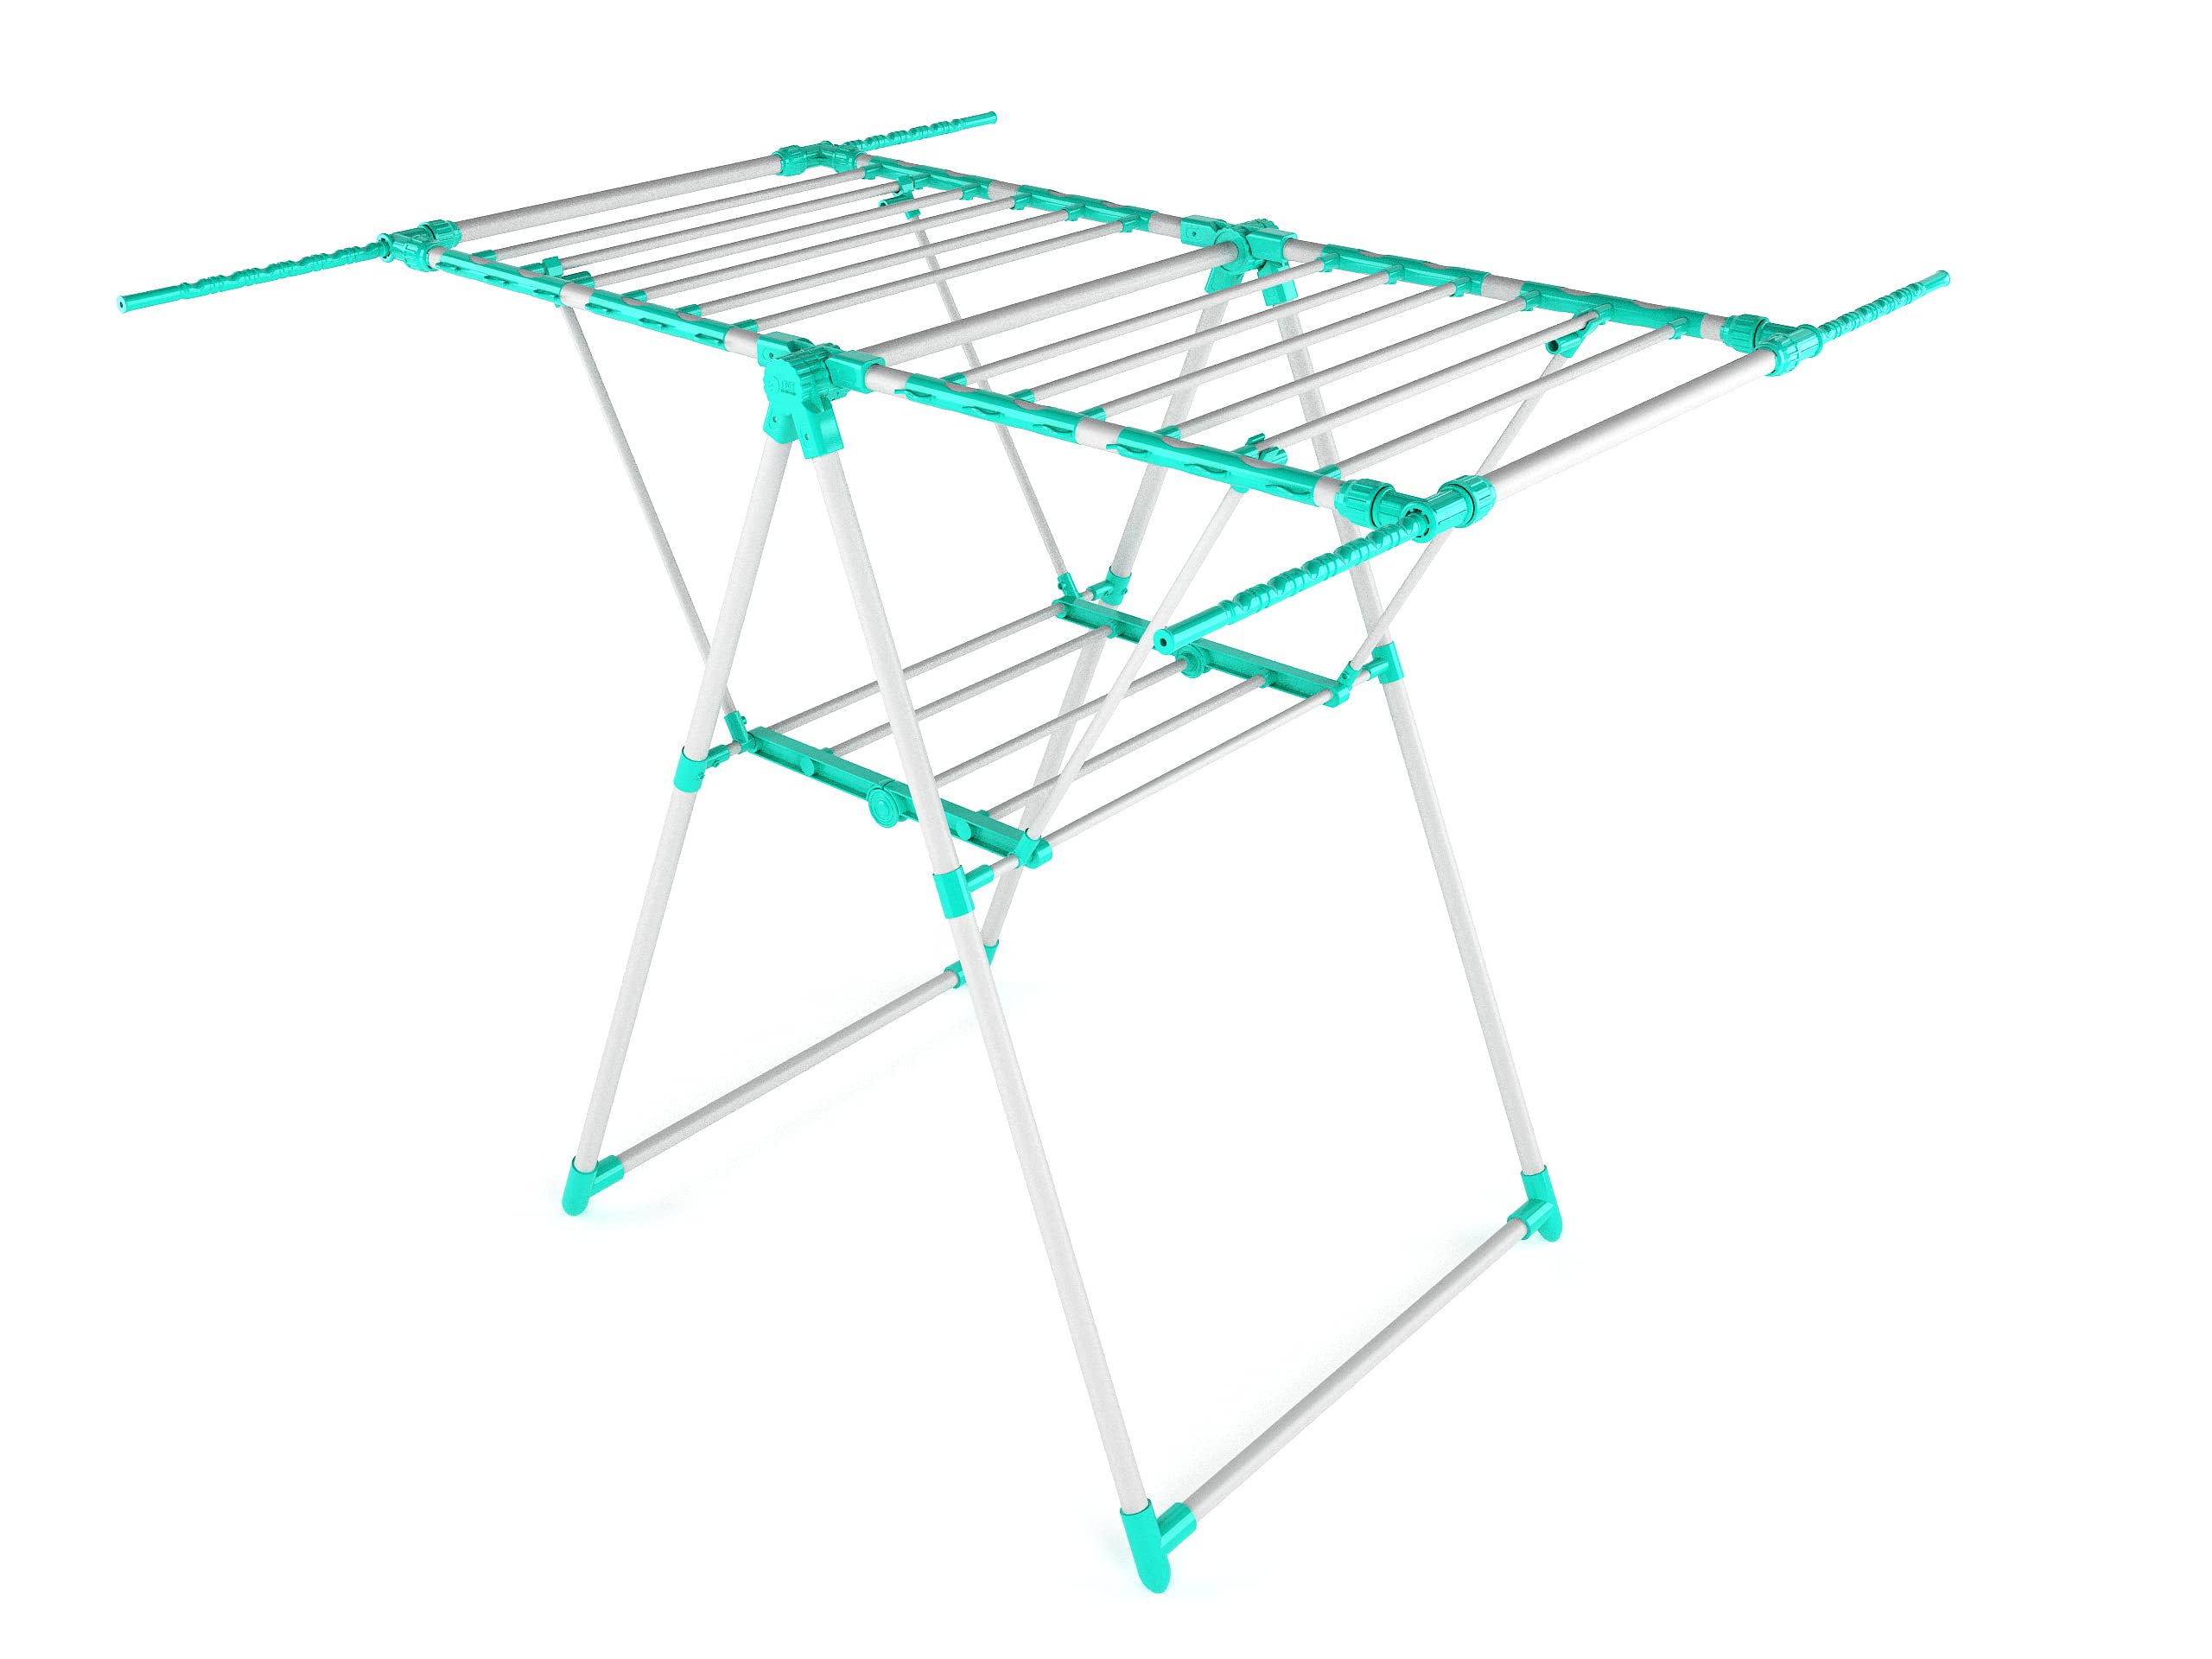 Plantex GI Steel Ozone Foldable Cloth Drying Rack/Cloth Hanger Stand for Home/Movable Cloth Rack - (Sea Green & Silver)